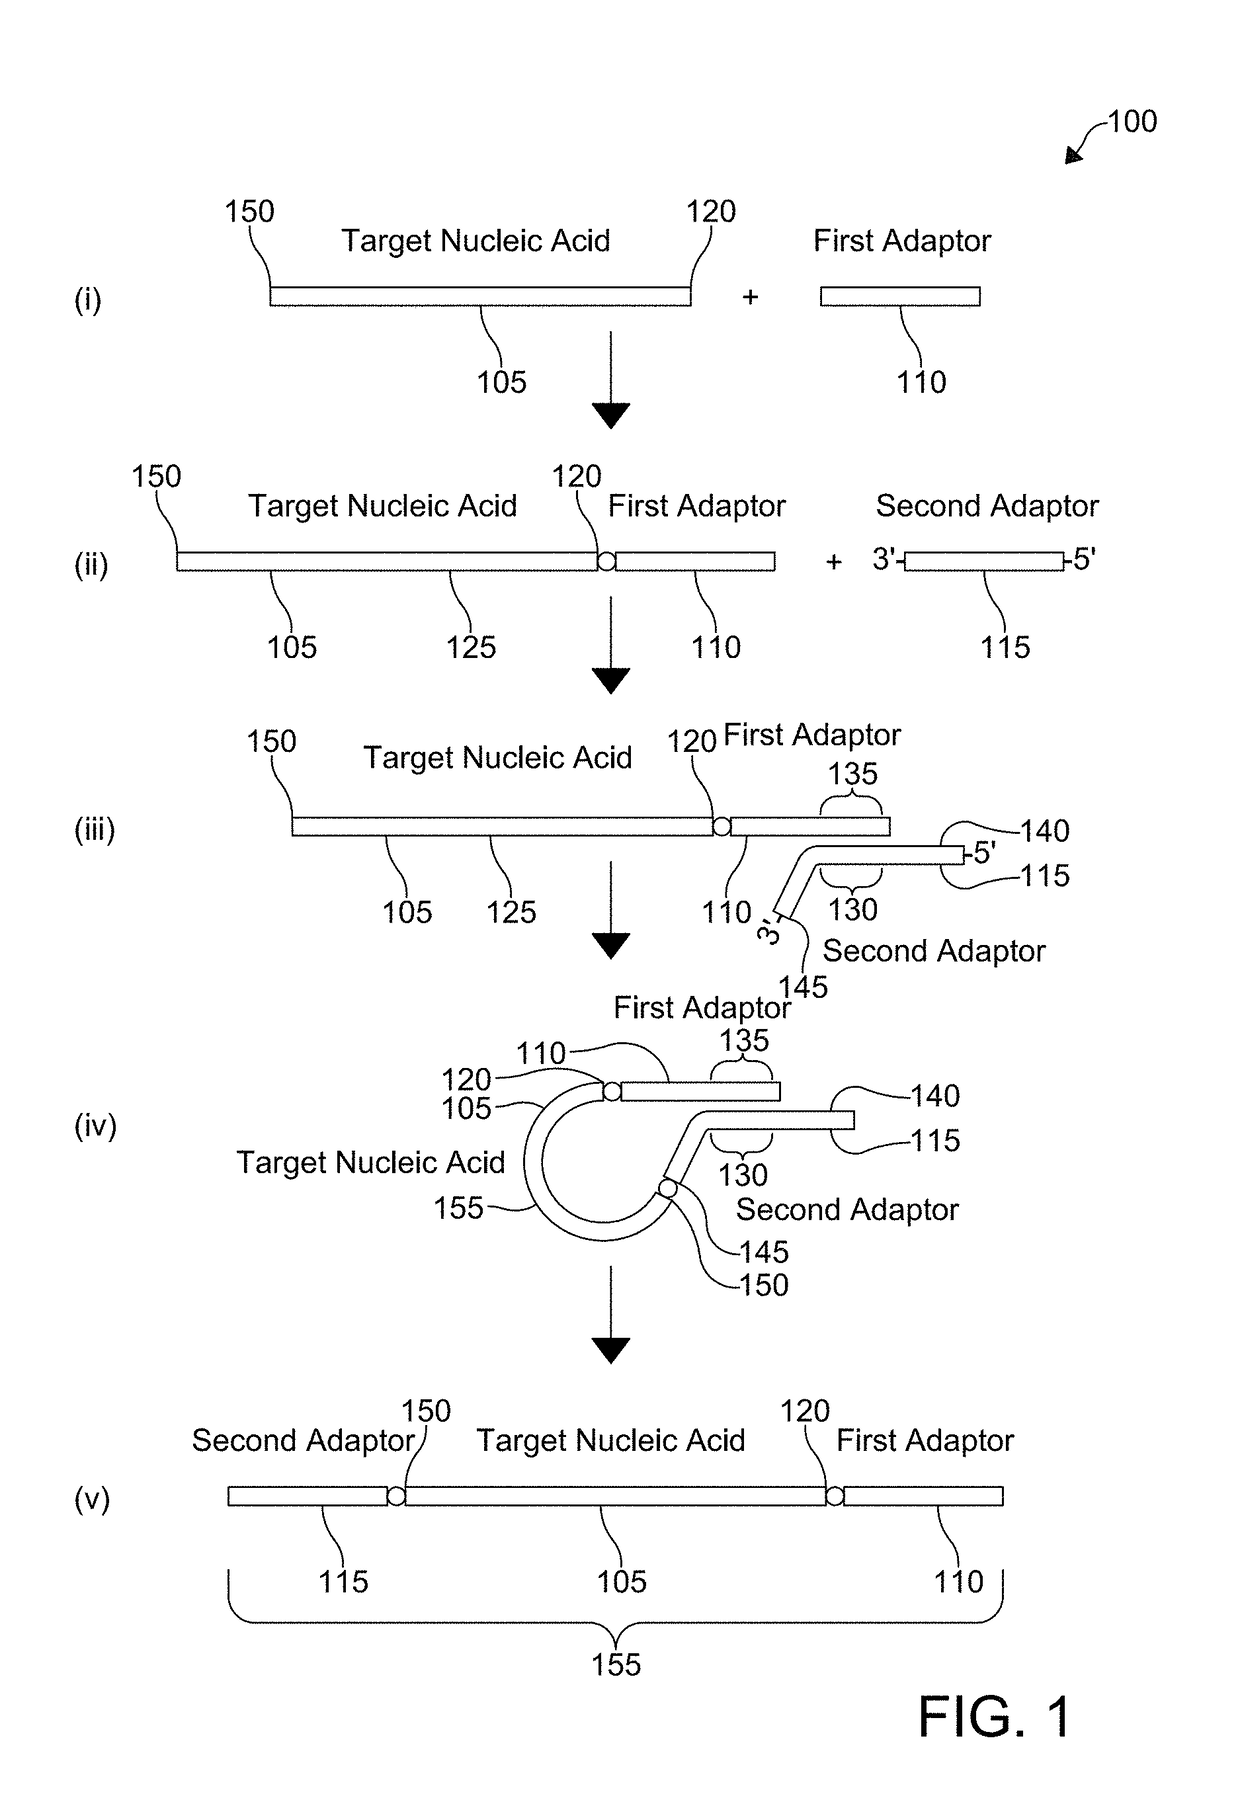 Coupling adaptors to a target nucleic acid